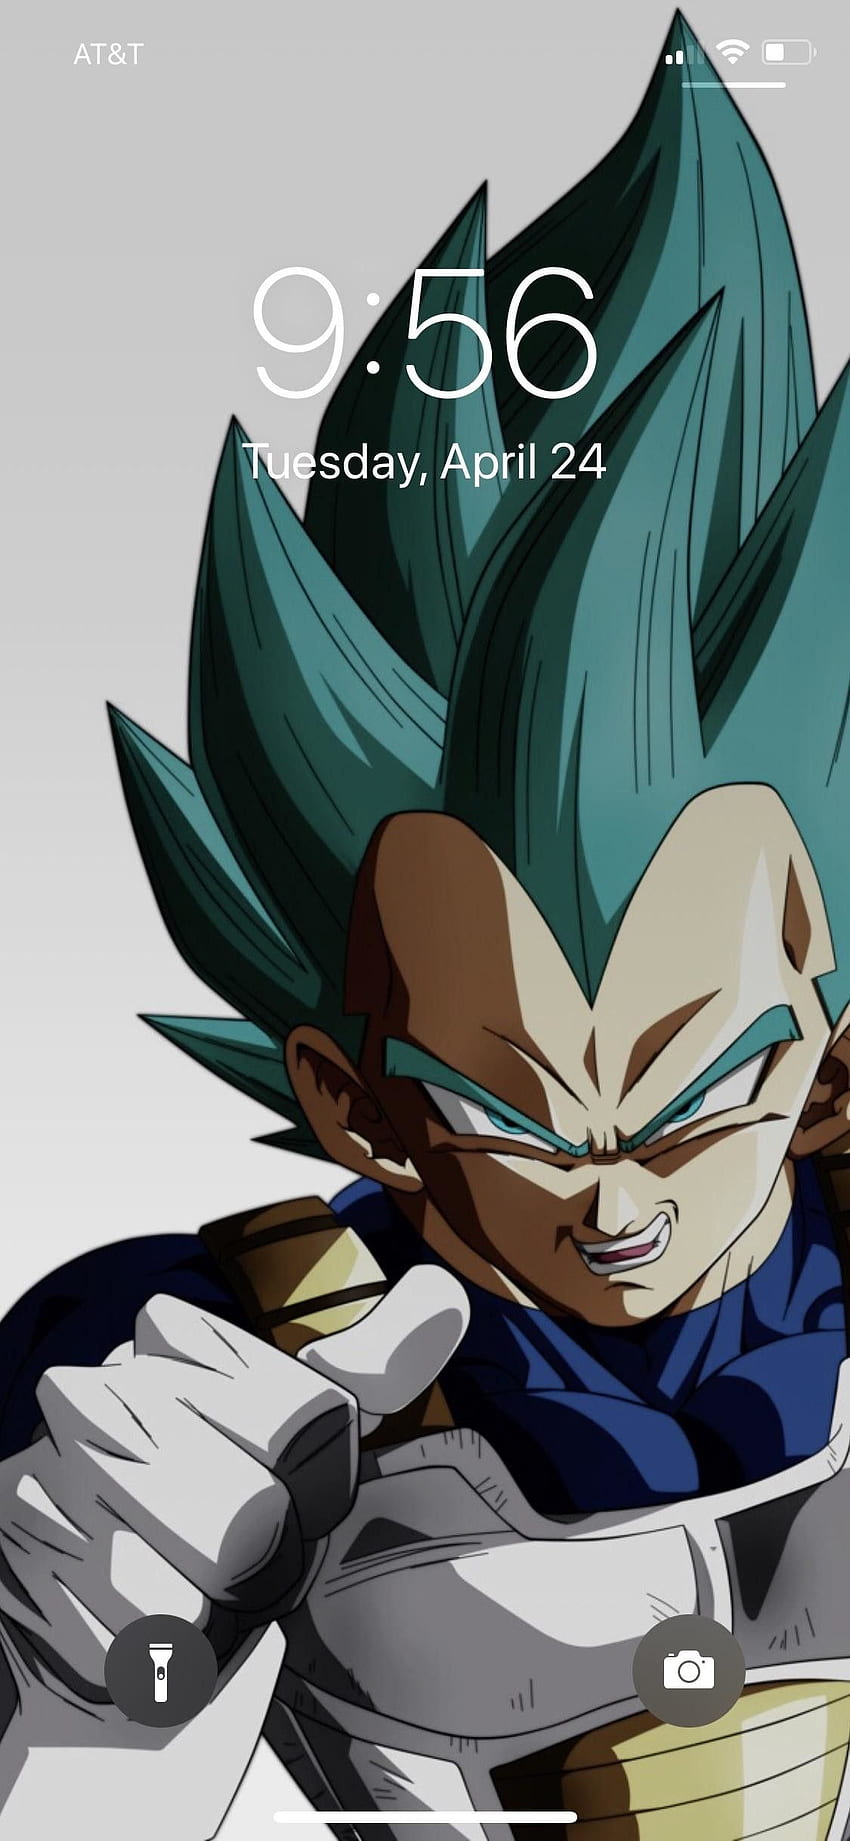 The Best Live Wallpaper For Your Phone - Vegeta Ultra Ego - YouTube | Live  wallpapers, Wallpaper, Wallpaper for your phone